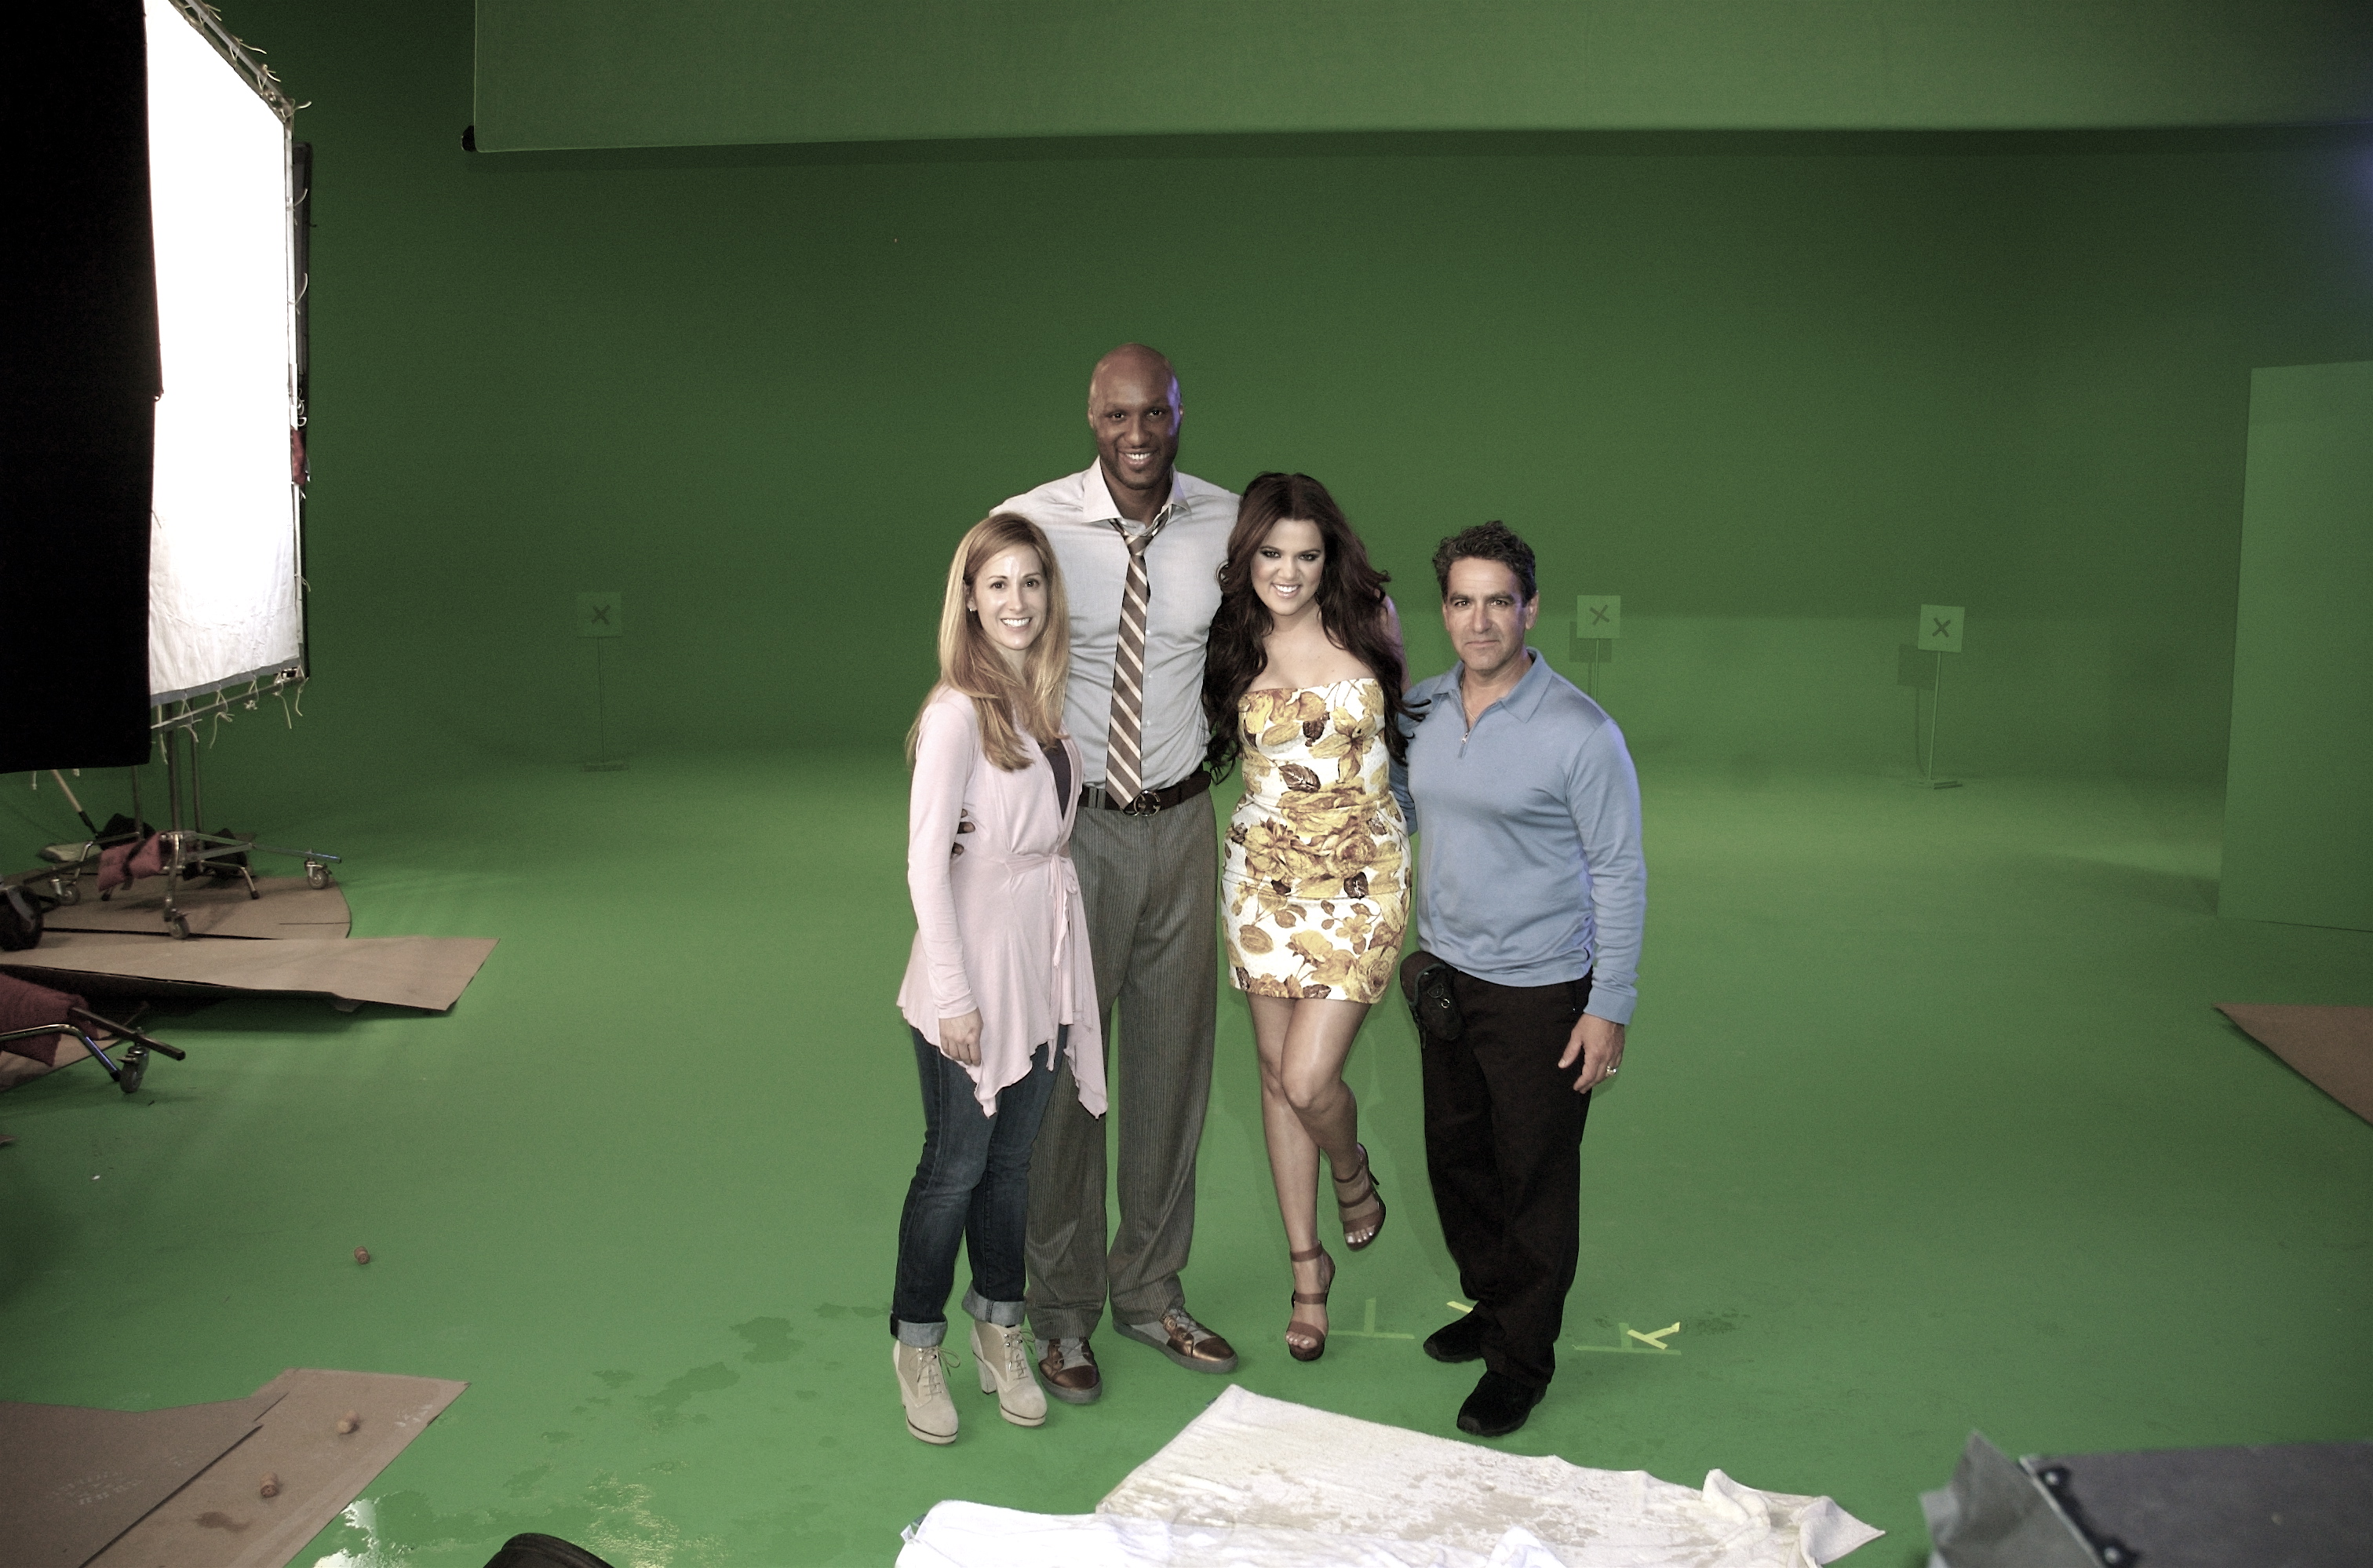 ON THE SET FILMING E CHANNEL 2011 REBRAND WITH KHLOE'KARDASHIAN ,LAMAR ODOM & THE DANCE SCENE VANITIES PRODUCED BY ROMI LANE .DIRECTED BY SARAH HAMILTON ..